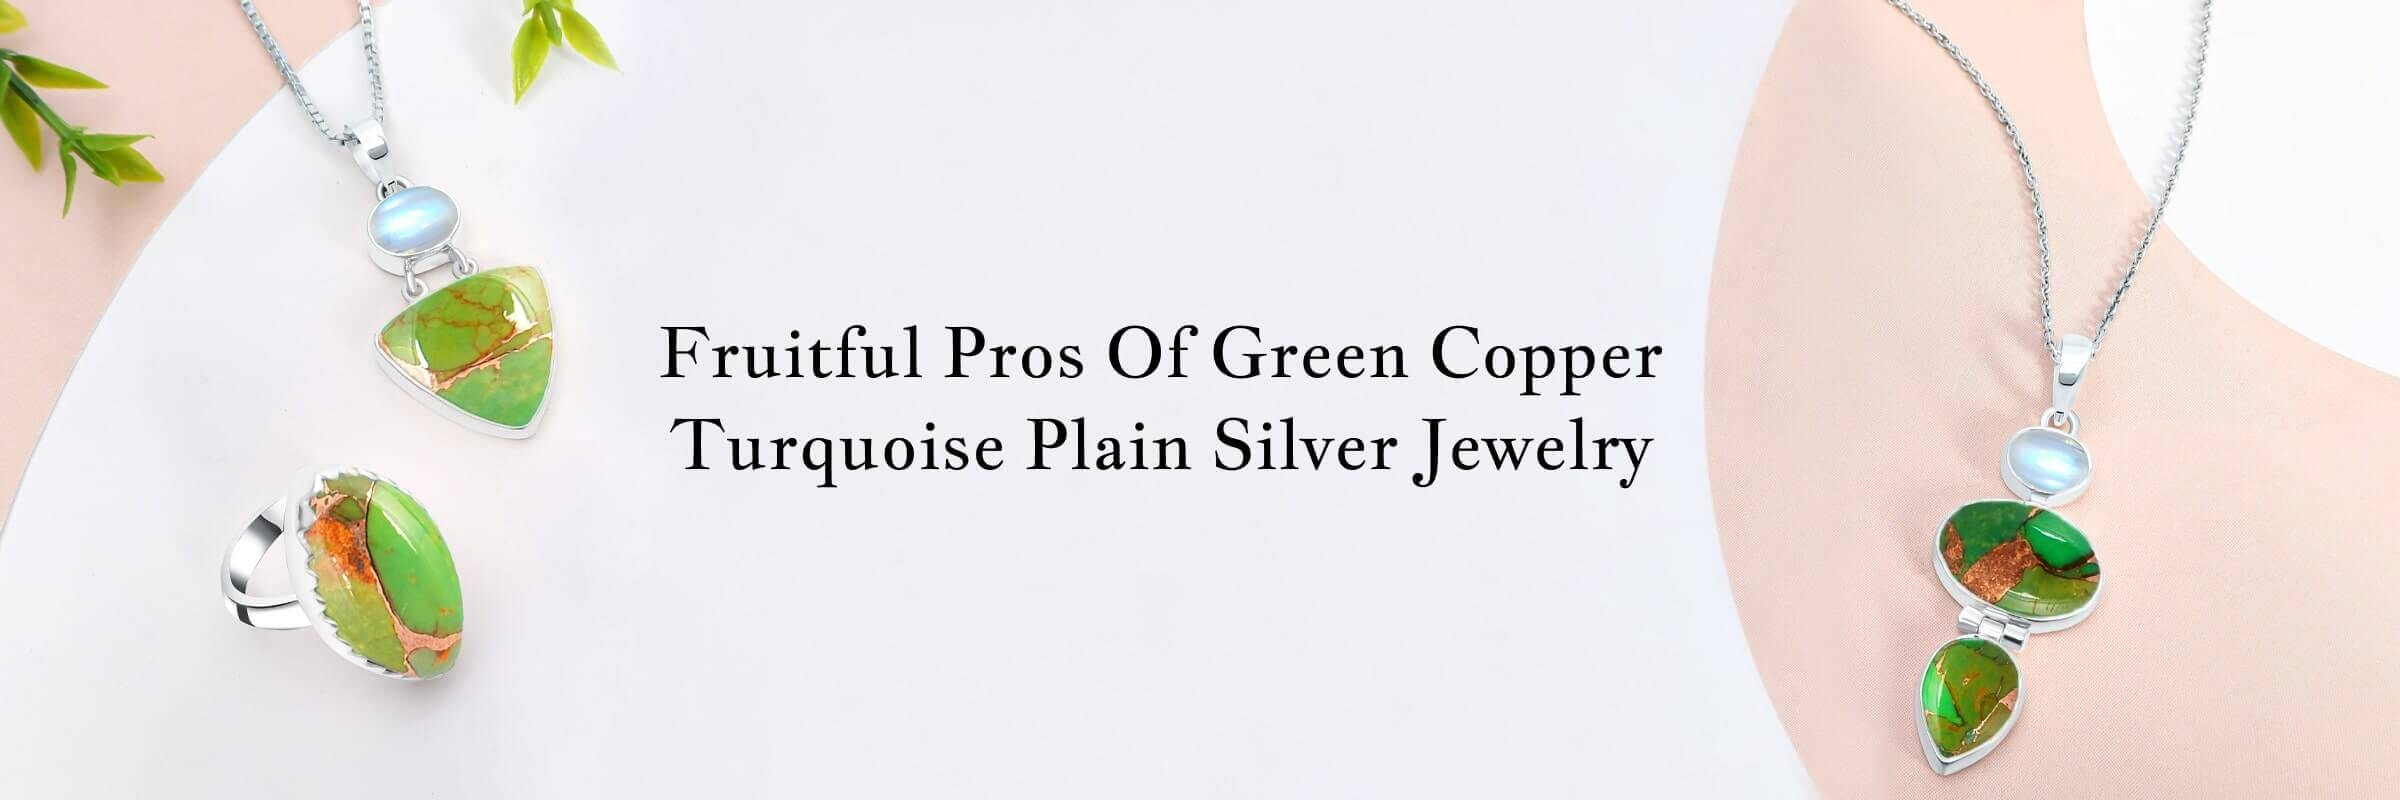 Benefits of Green Copper Turquoise Plain Silver Jewelry